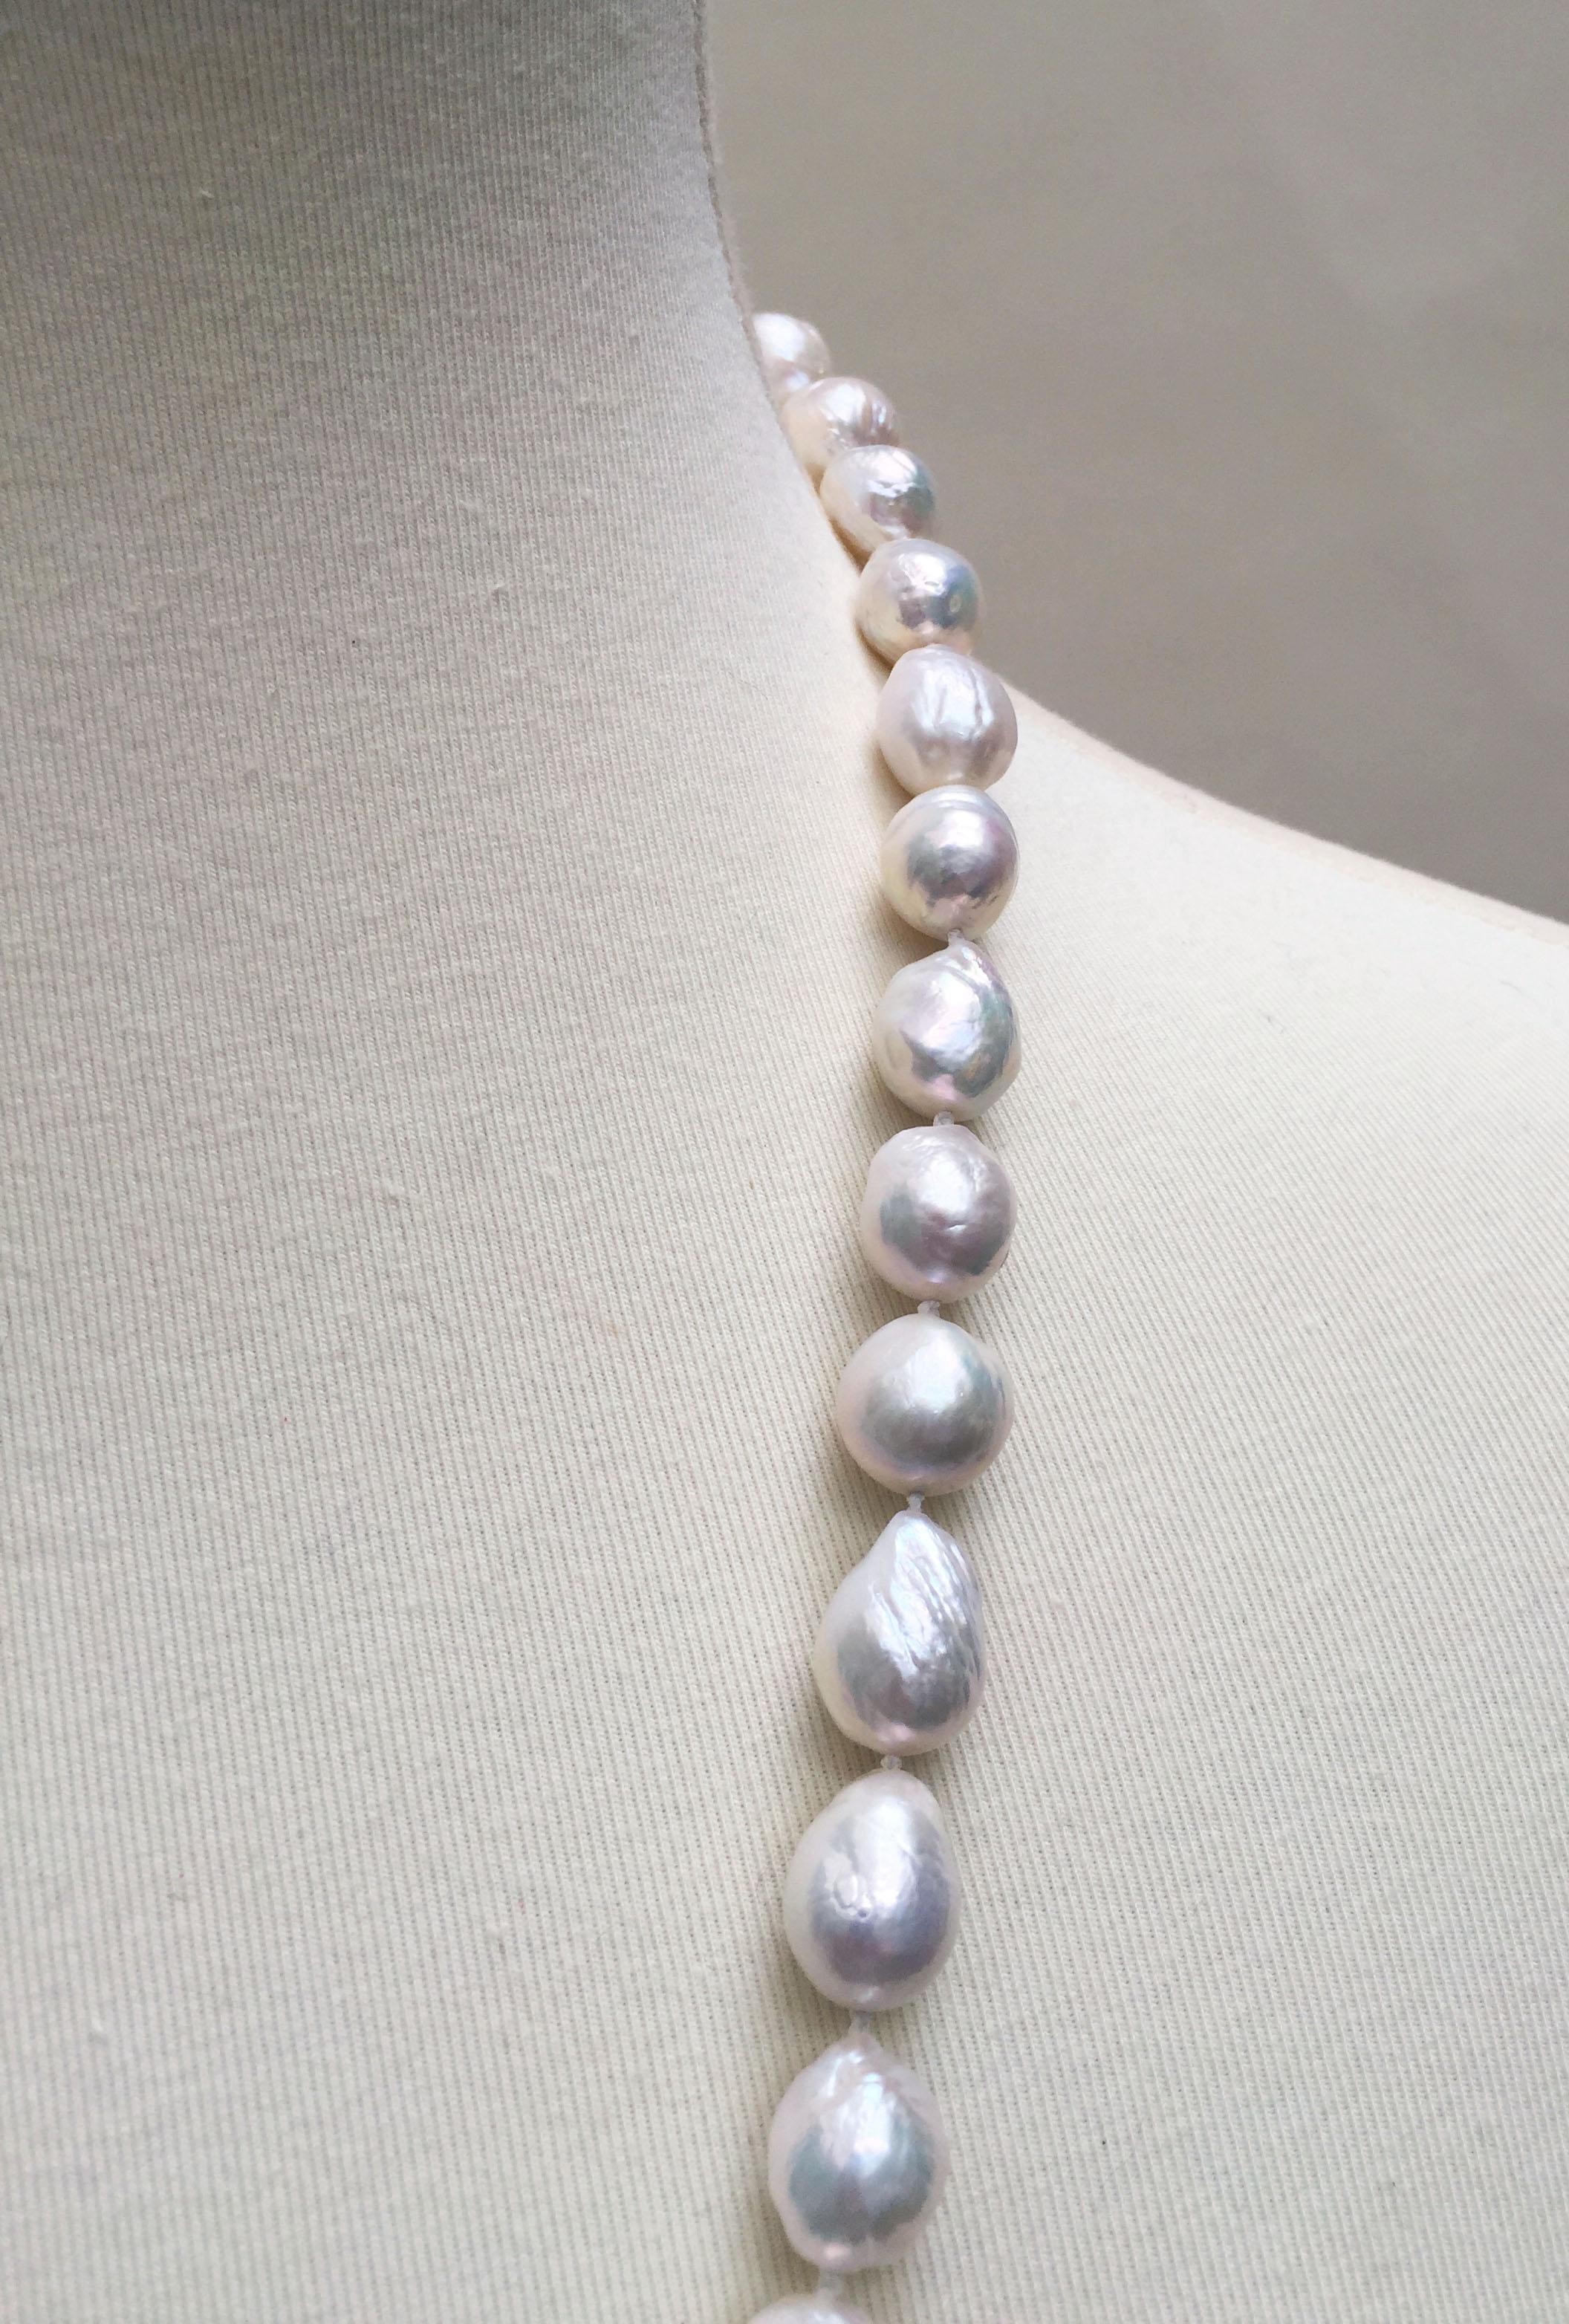 Artist Large Pearl Necklace with Pearl and Diamond Tassel and 14 Karat White Gold Clasp